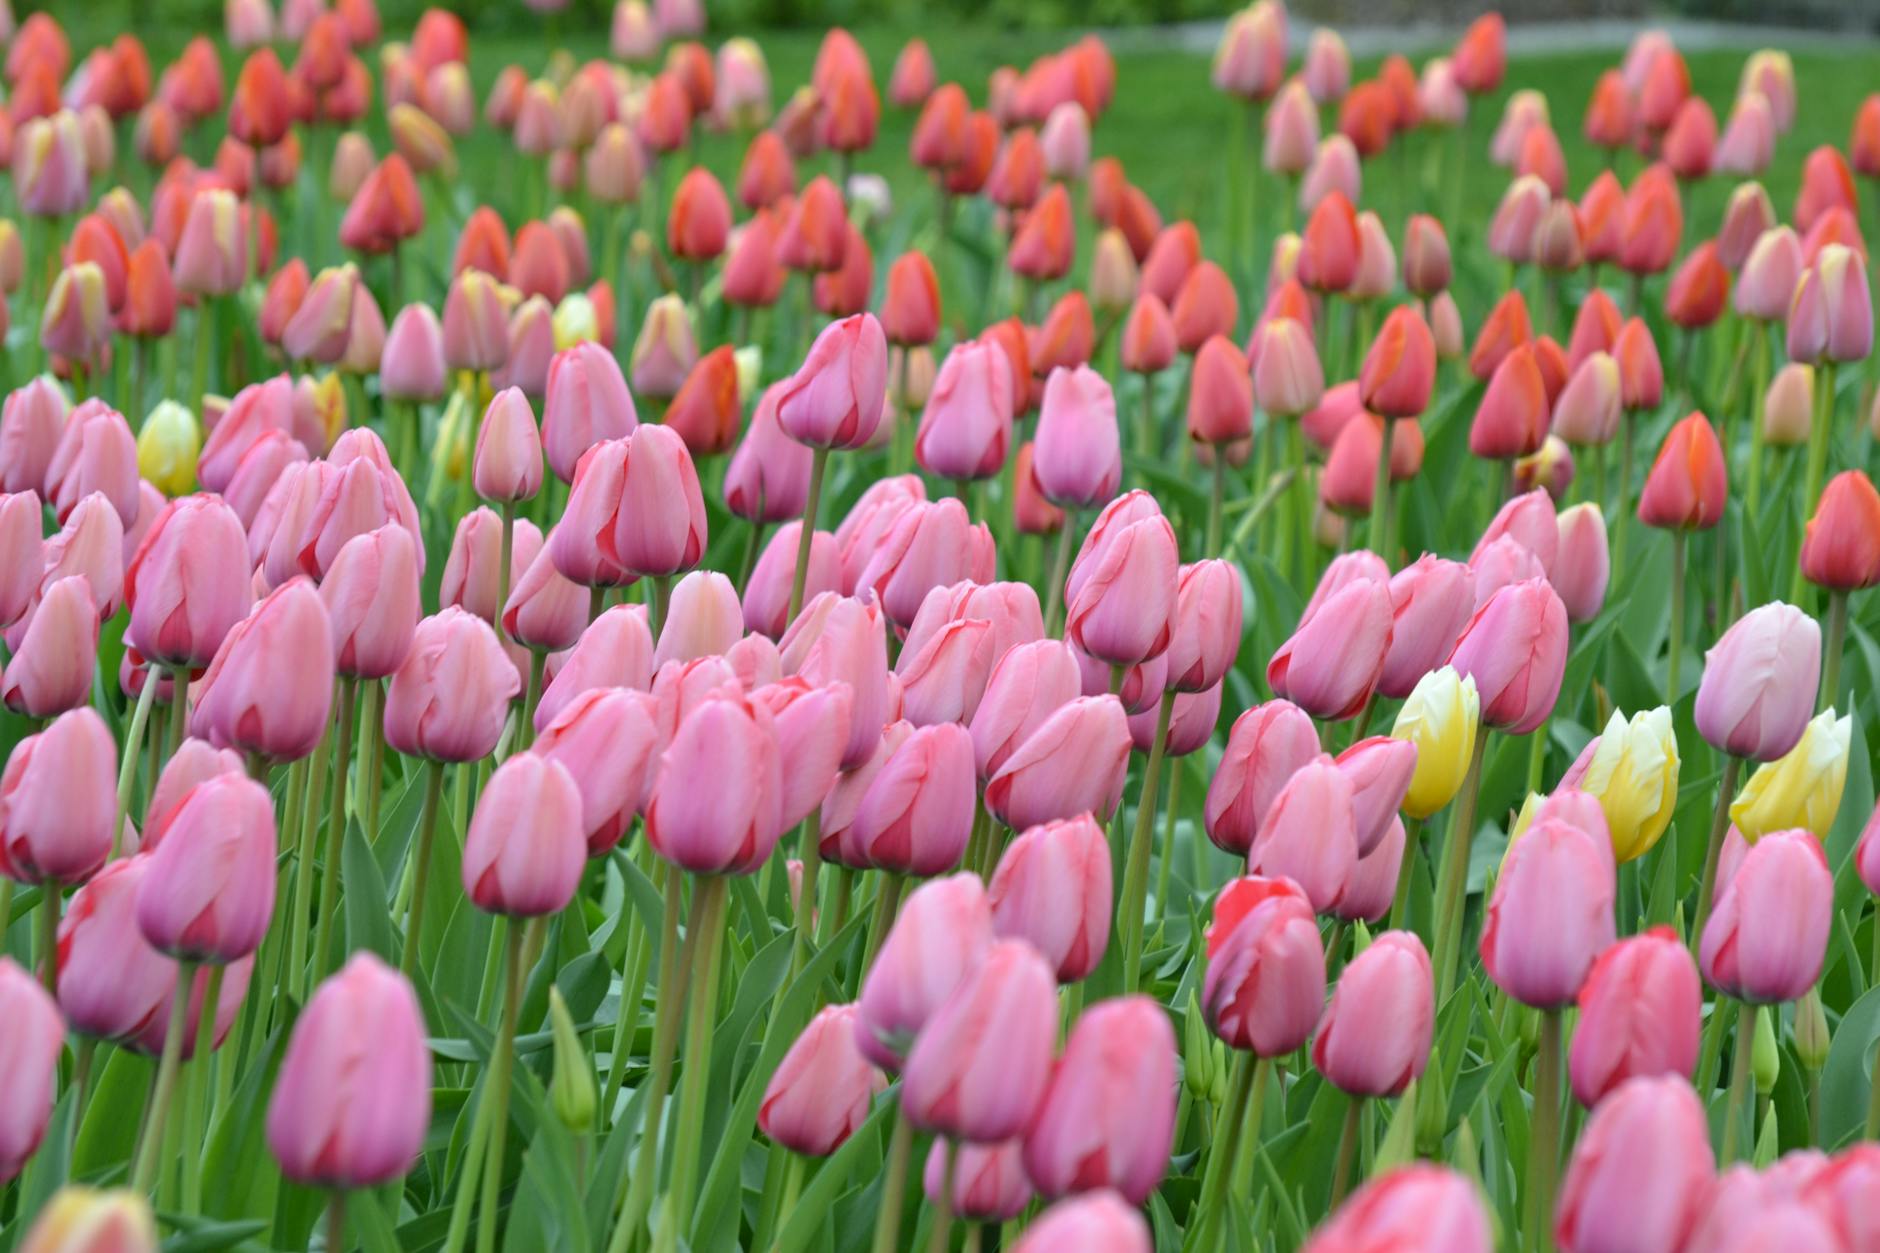 Pink and Red Tulips Flower Field · Free Stock Photo